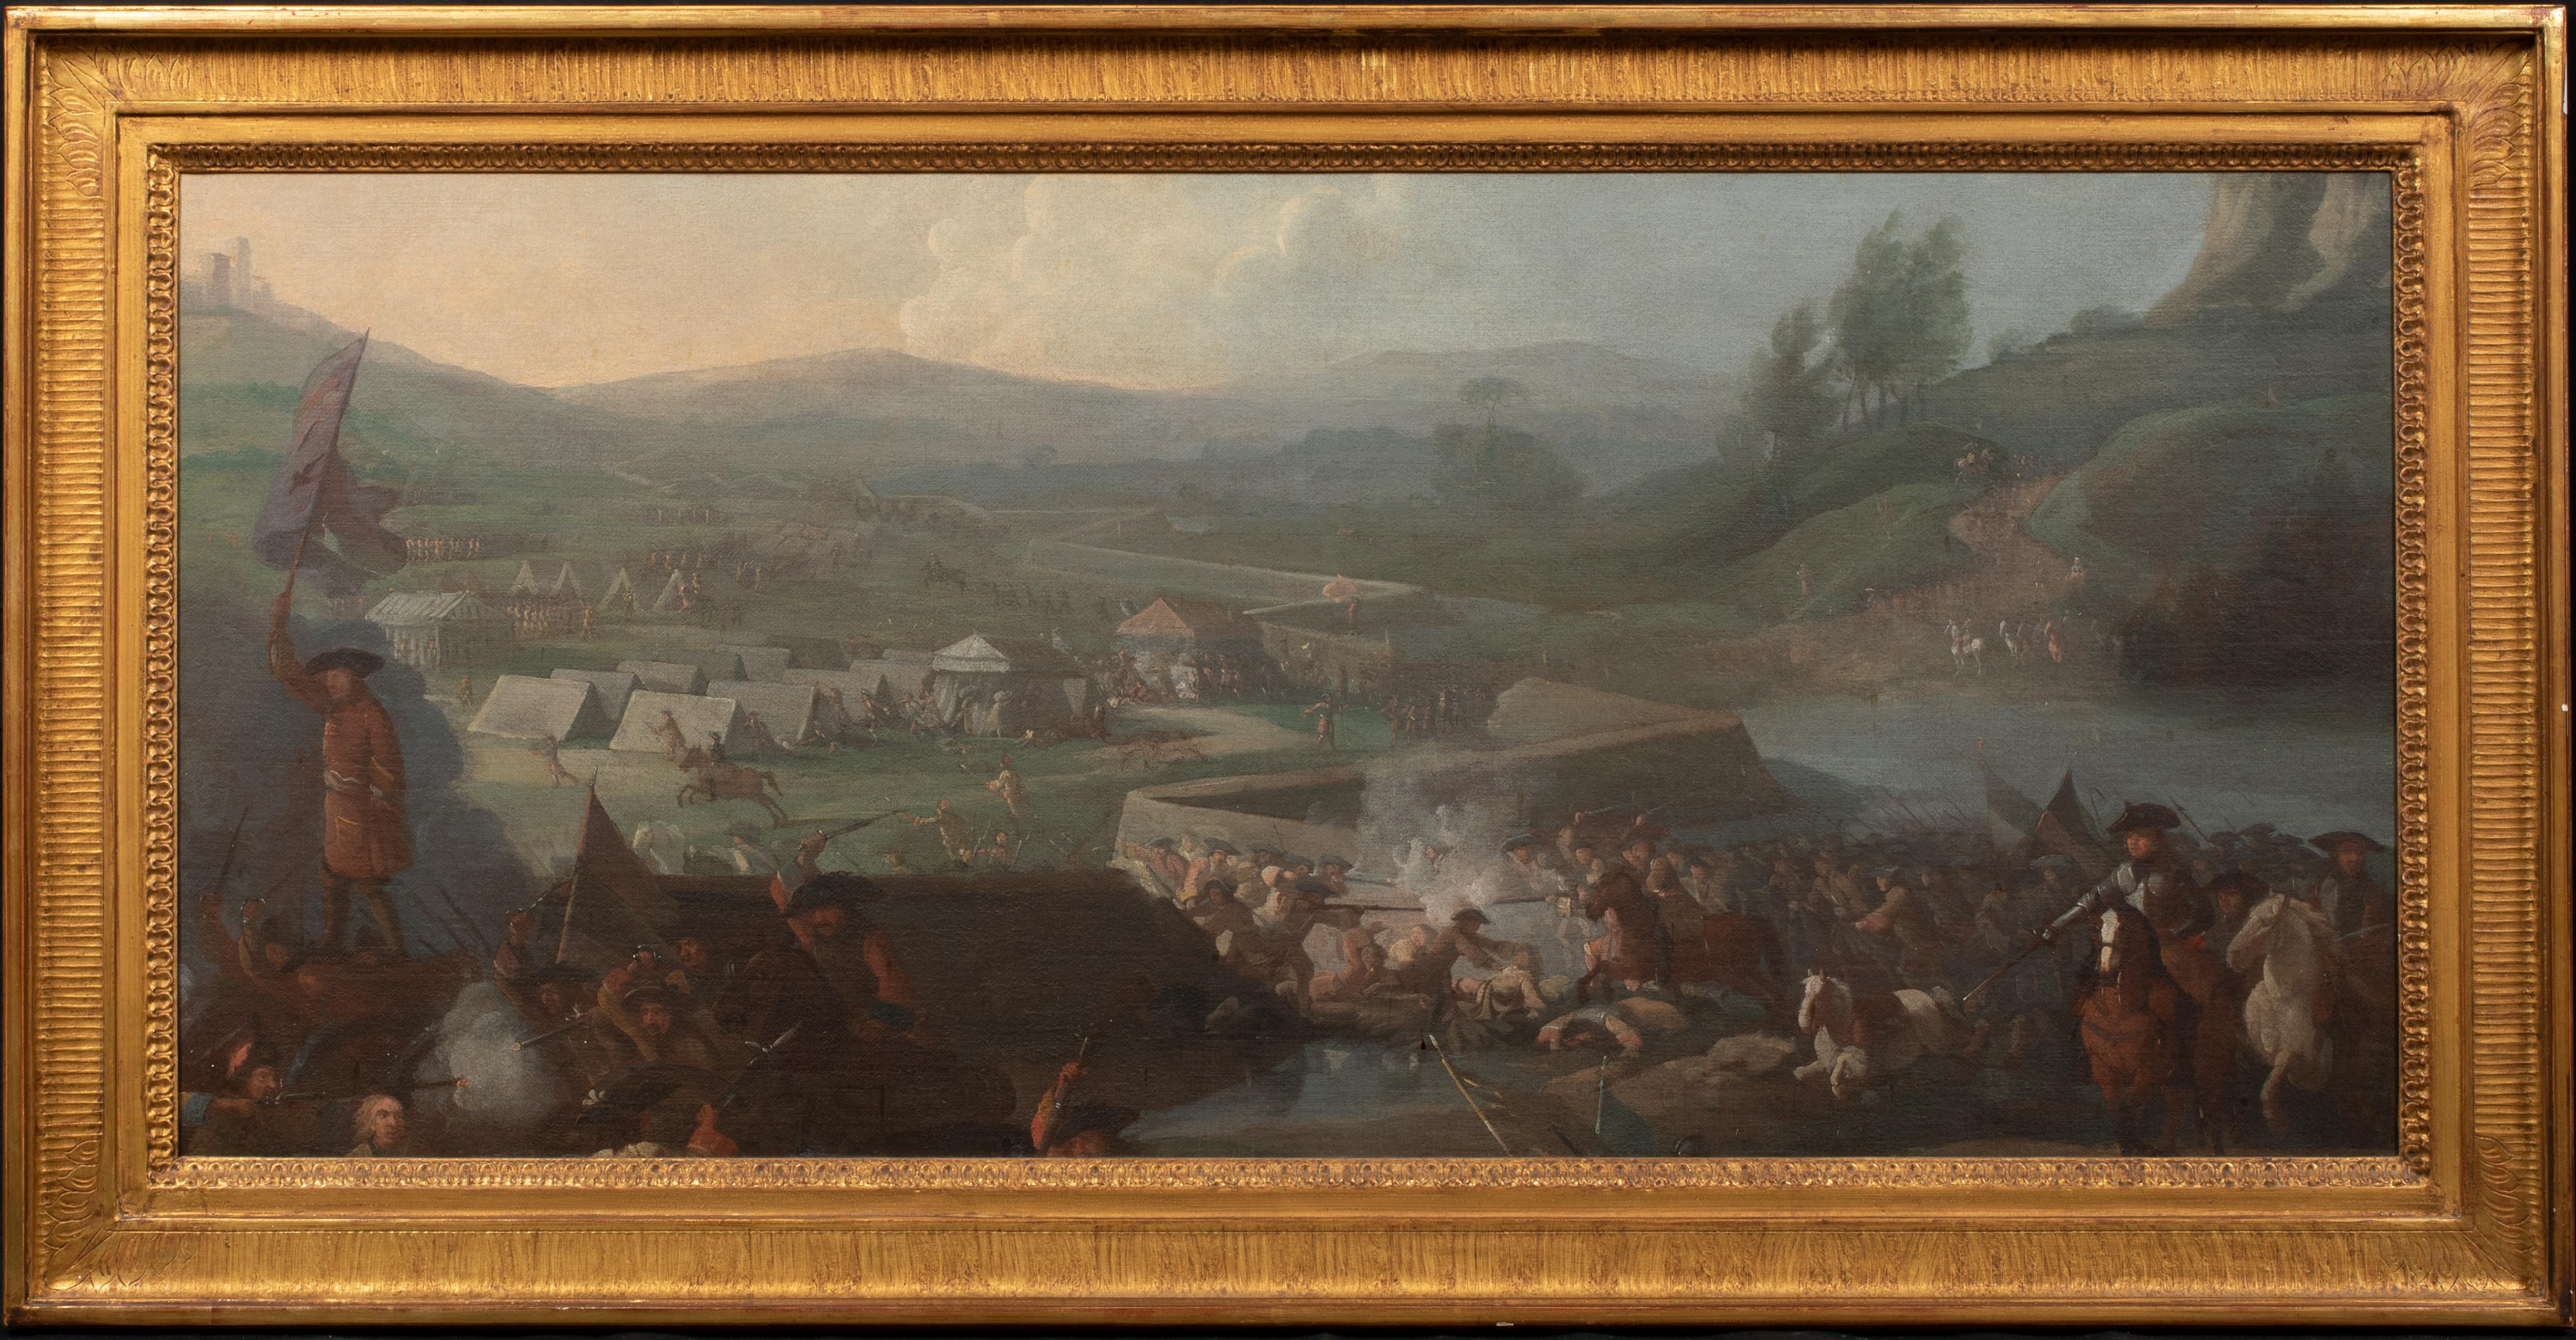 Unknown Landscape Painting - American War Of Independence, Believed to be the Battle of Saratoga